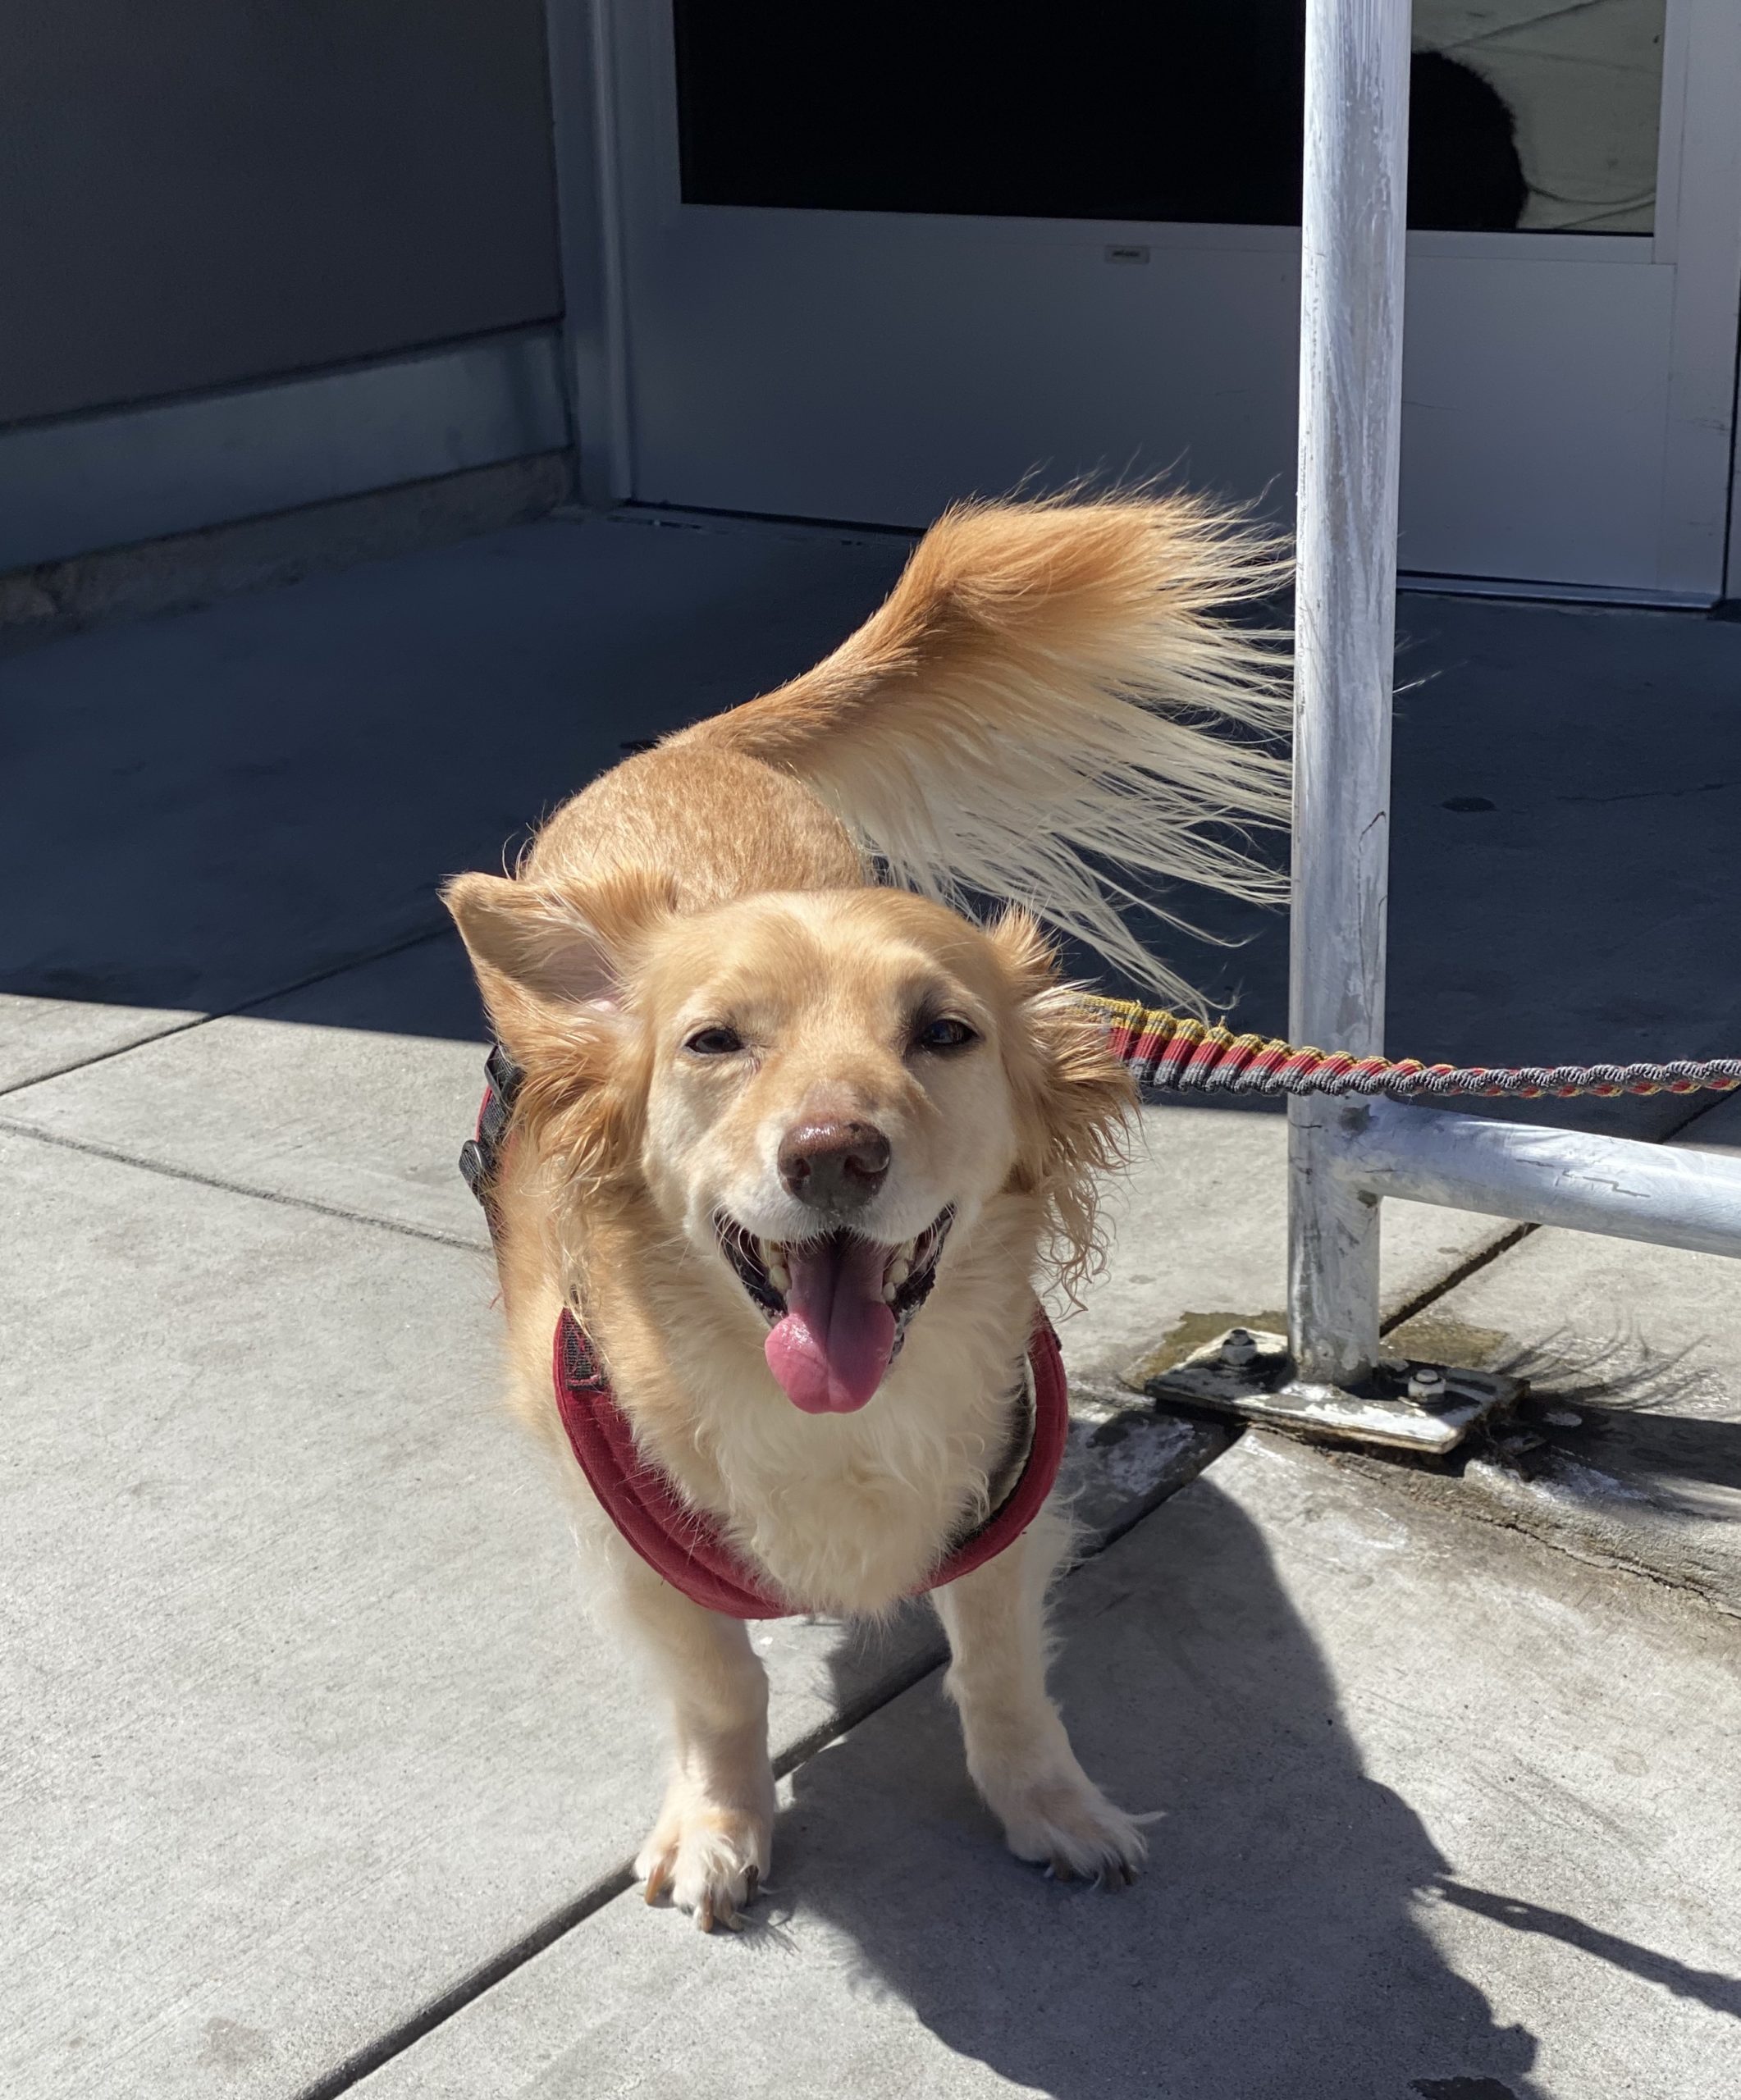 Blond Pembroke Welsh Corgi Long-Haired Dachshund Mix Grinning At The Camera